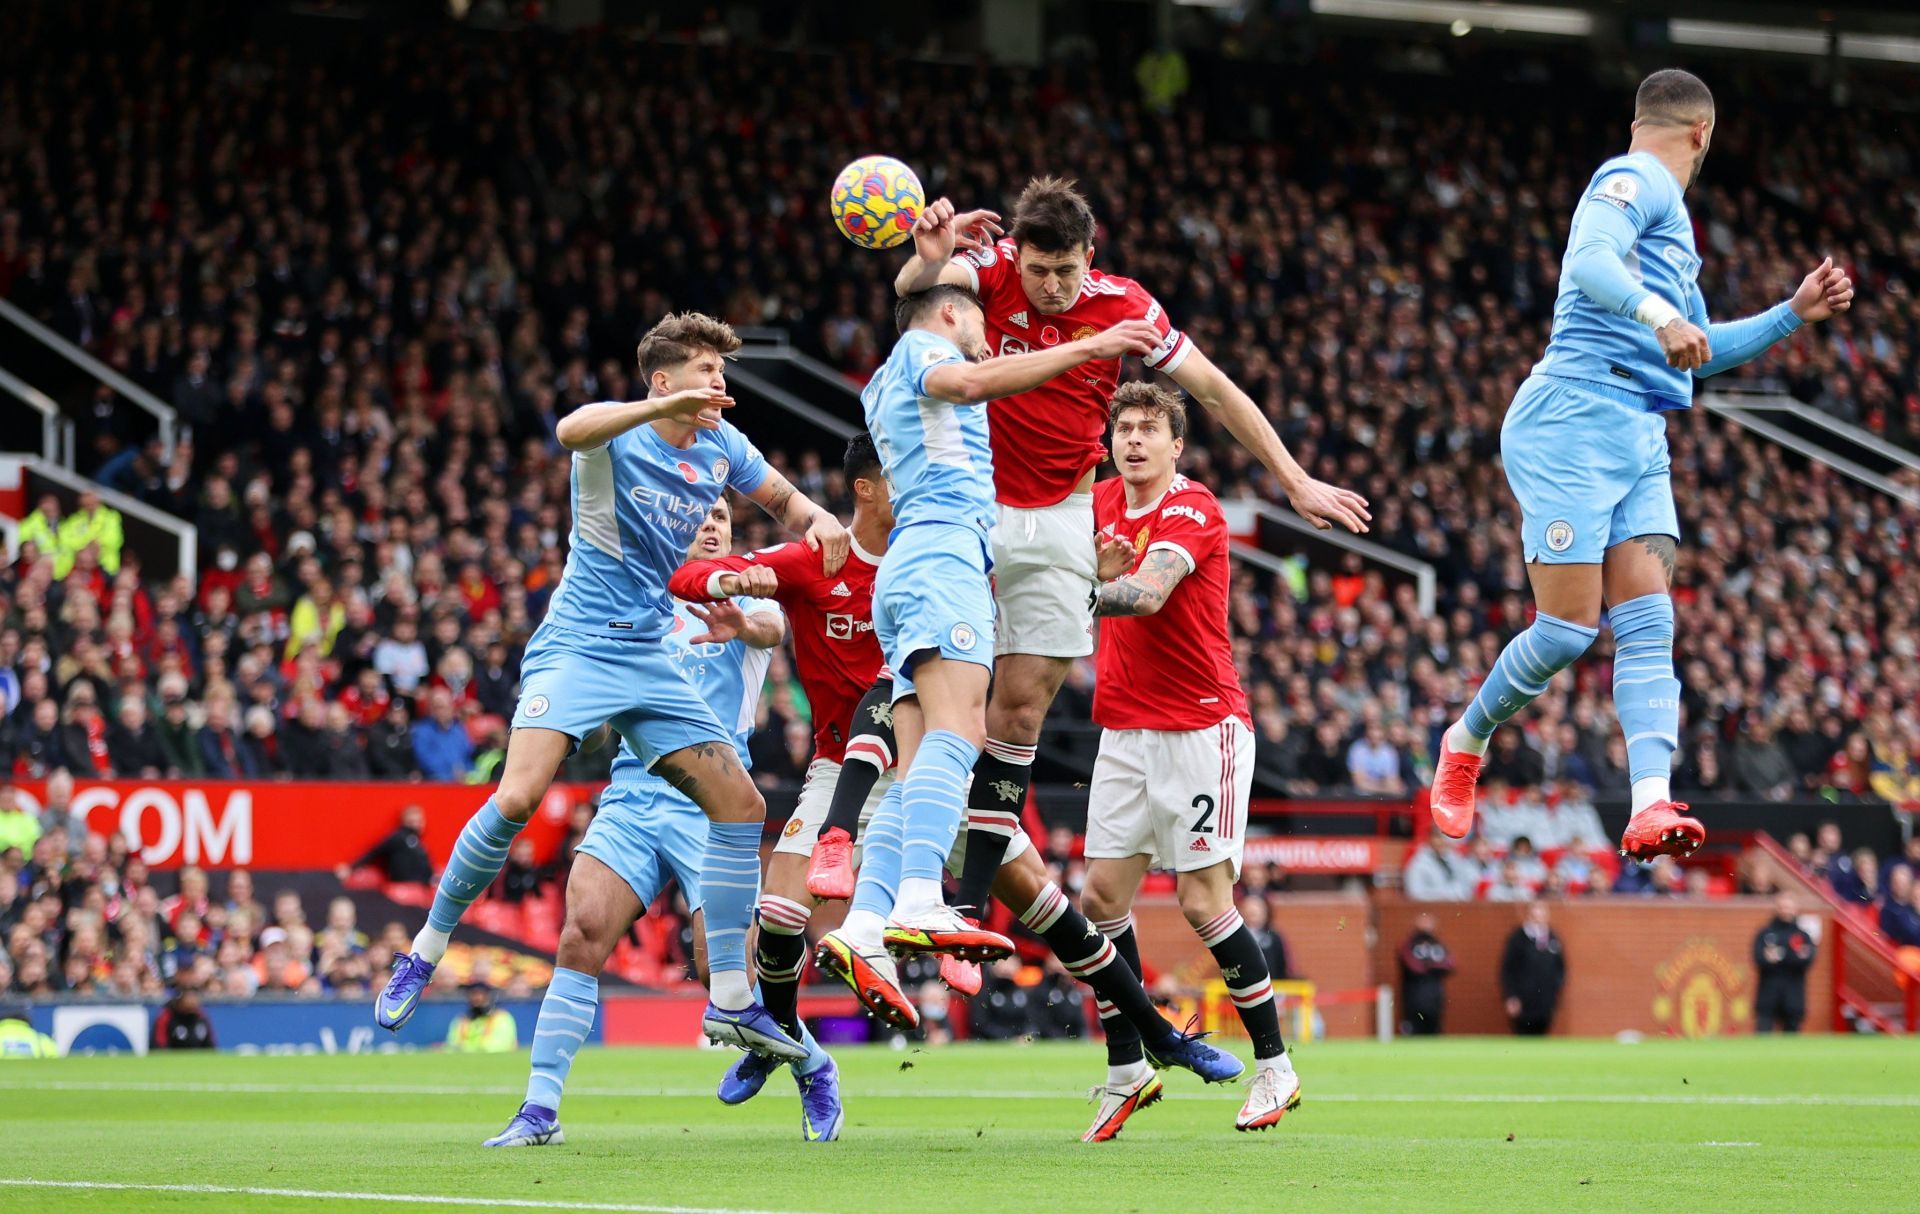 Manchester City beat Manchester United for the first time in five derbies